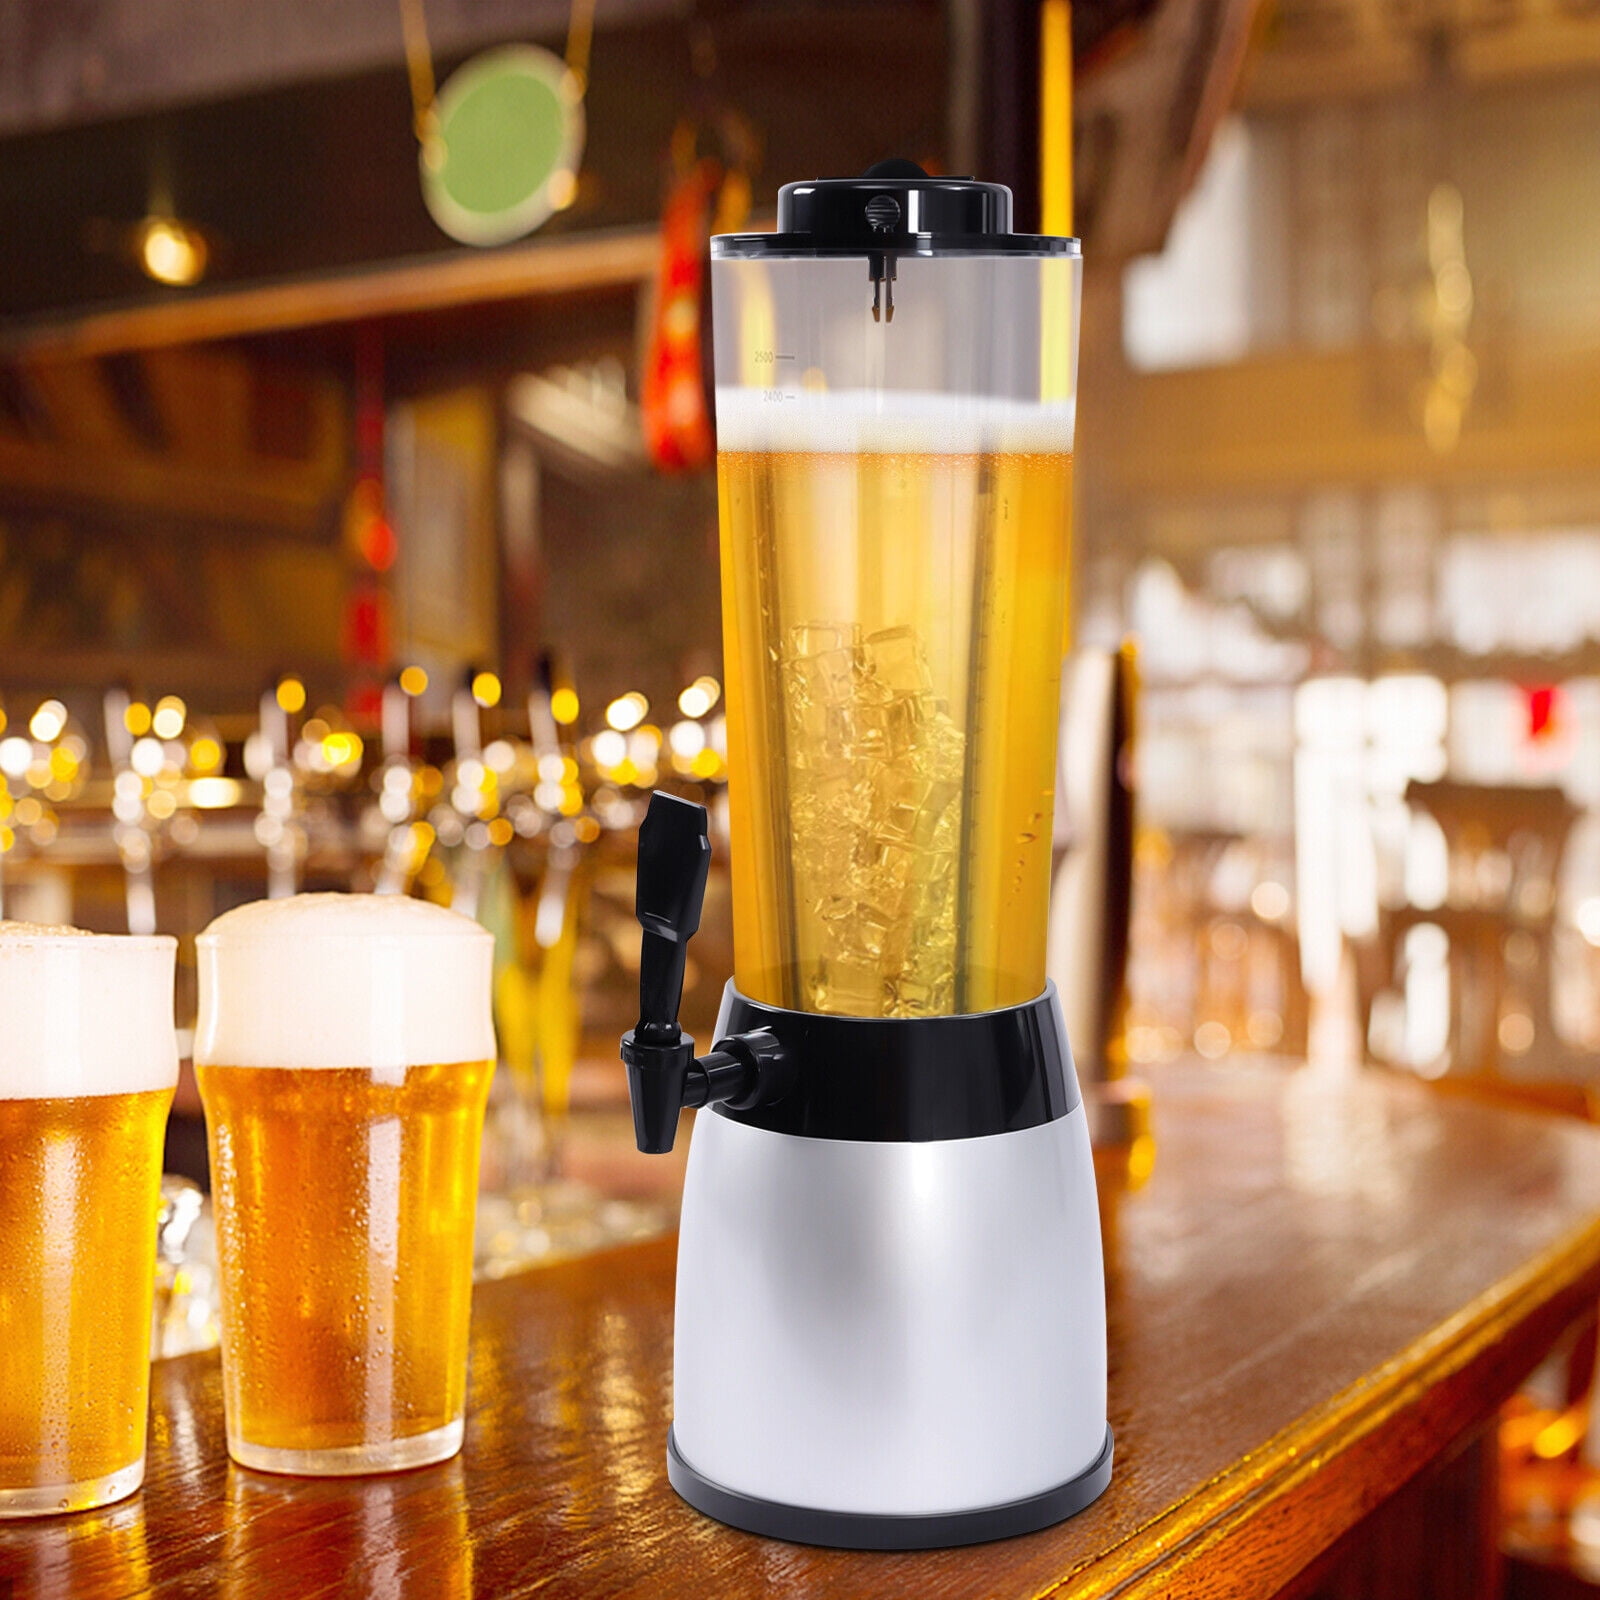 OUKANING 3L Beer Tower Dispenser Drink Container Wine Beer Milk Beverage  Tower Dispenser Tool w/3 Nozzle Bar Party